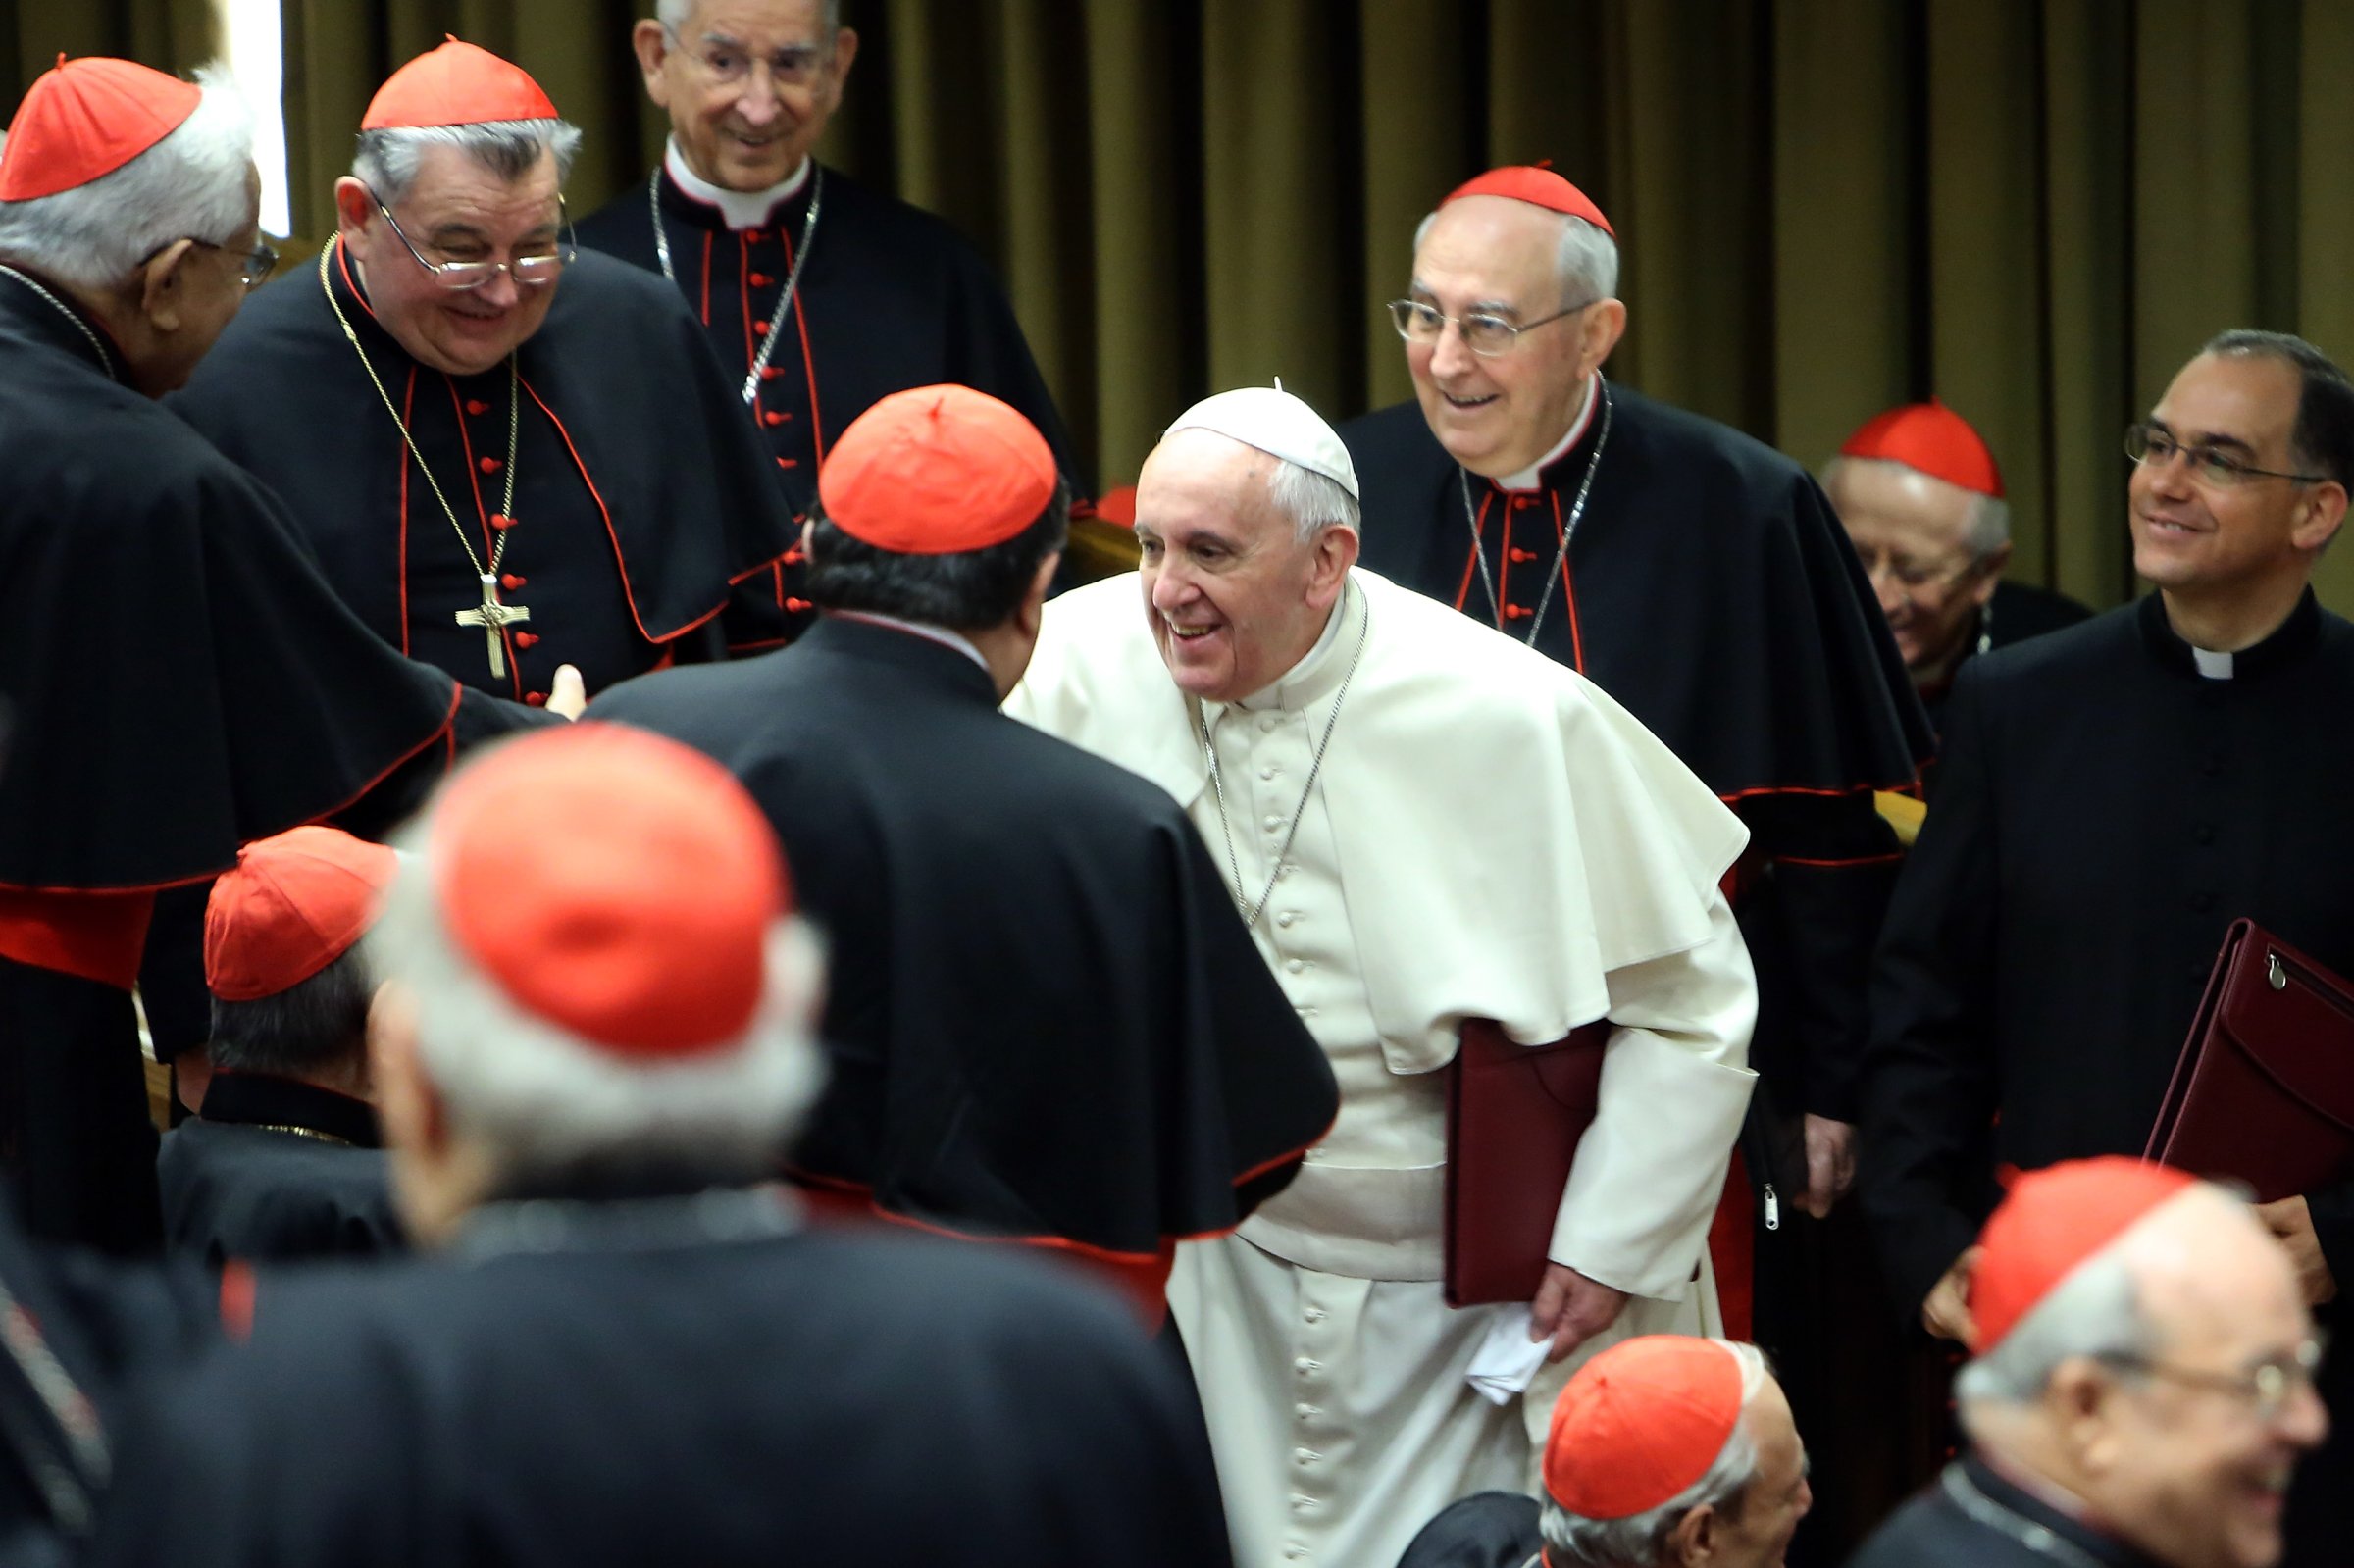 Extraordinary Consistory On the Themes of Family Is Held At Vatican